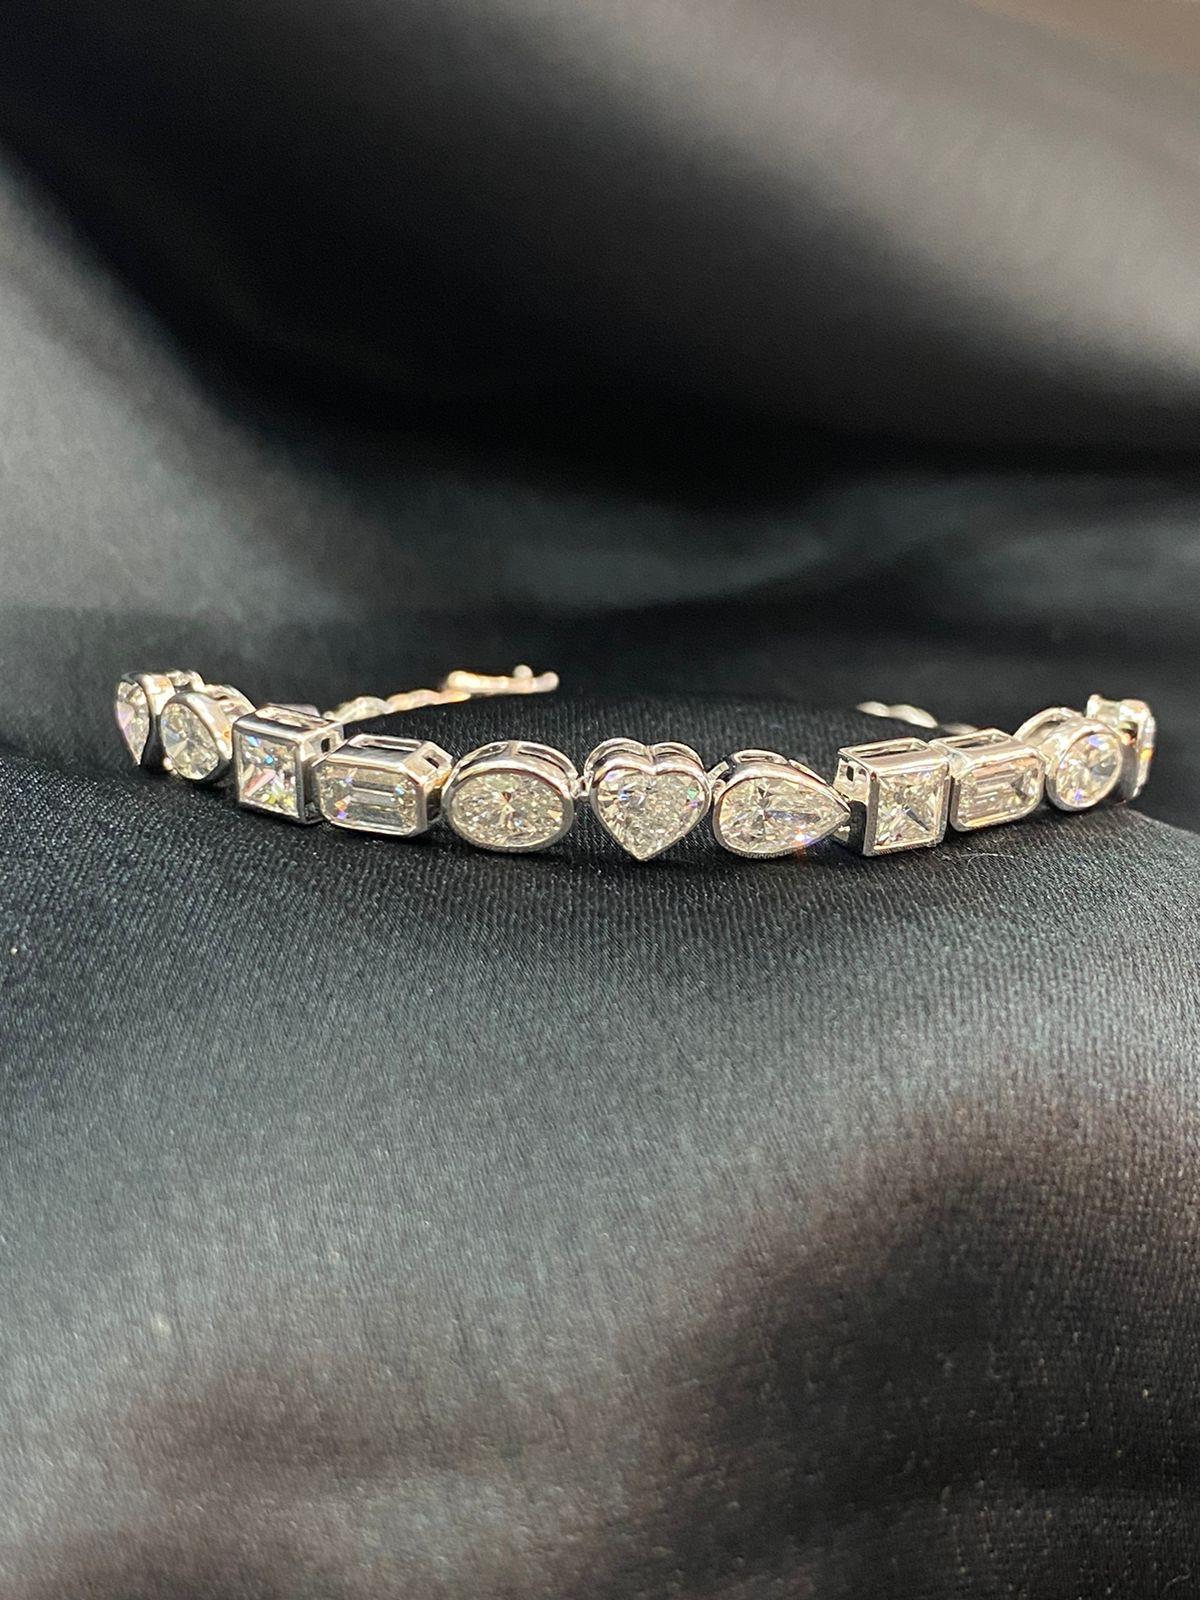 An exclusive bracelet in contemporary design, so fashion and particular, a expression of beauty and luxury, perfect for sophisticated ladies.
Bracelet come in 14k gold with Natural Diamonds in special cut , heart , emerald, princess, oval, each